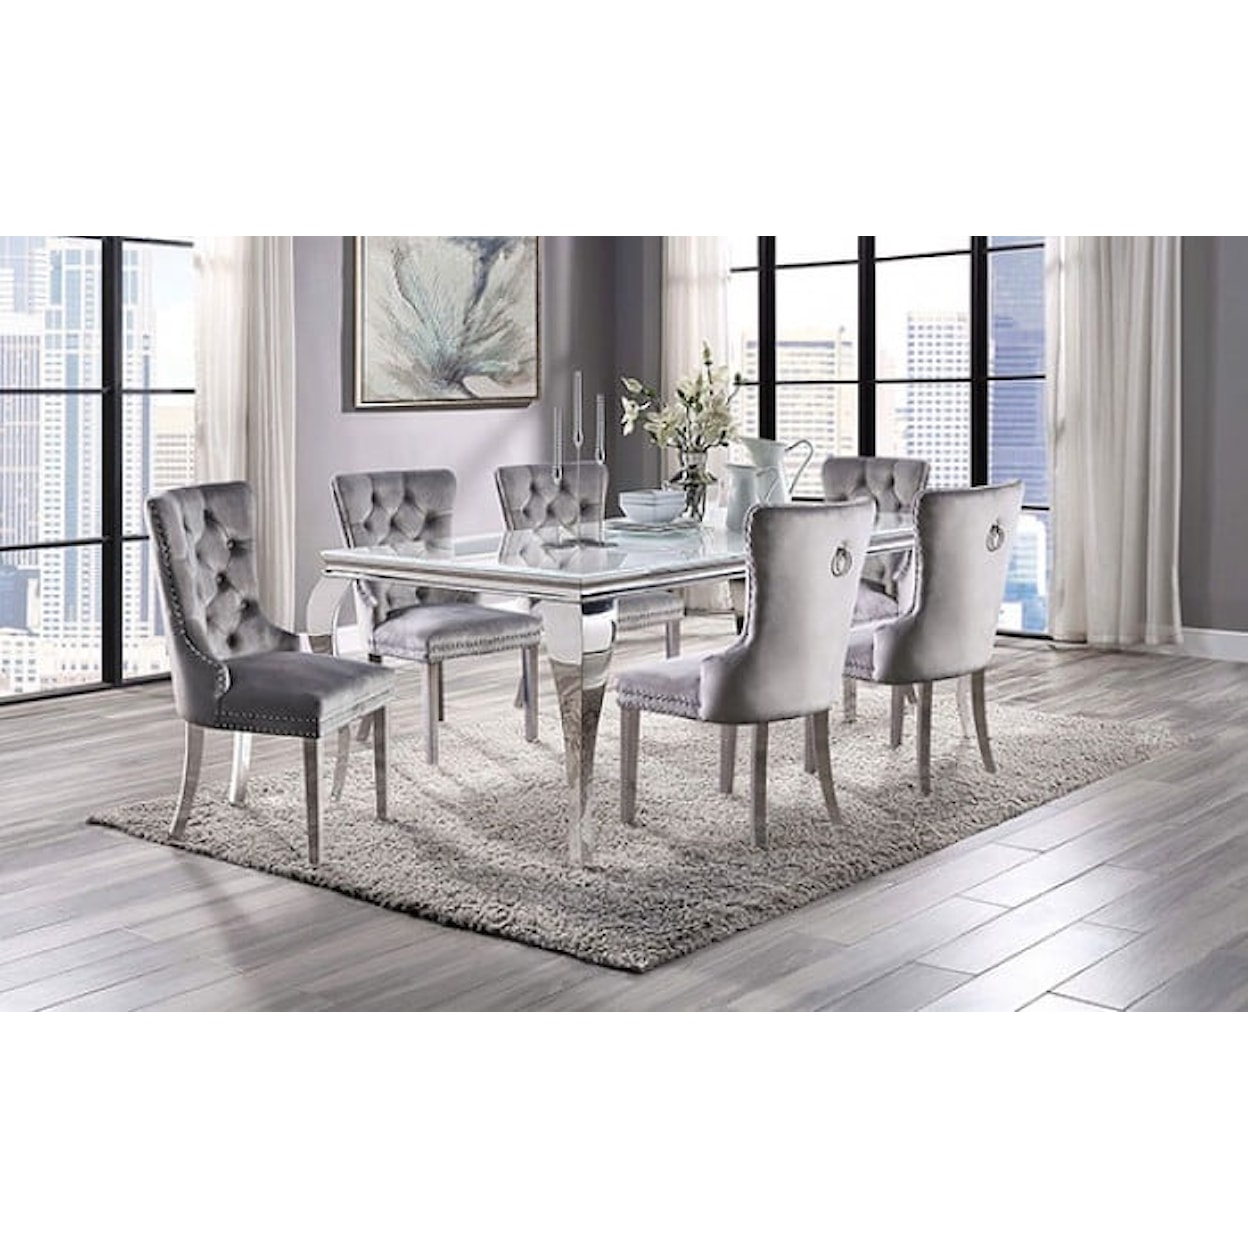 Furniture of America Neuveville 7-Piece Dining Set with Gray Chairs